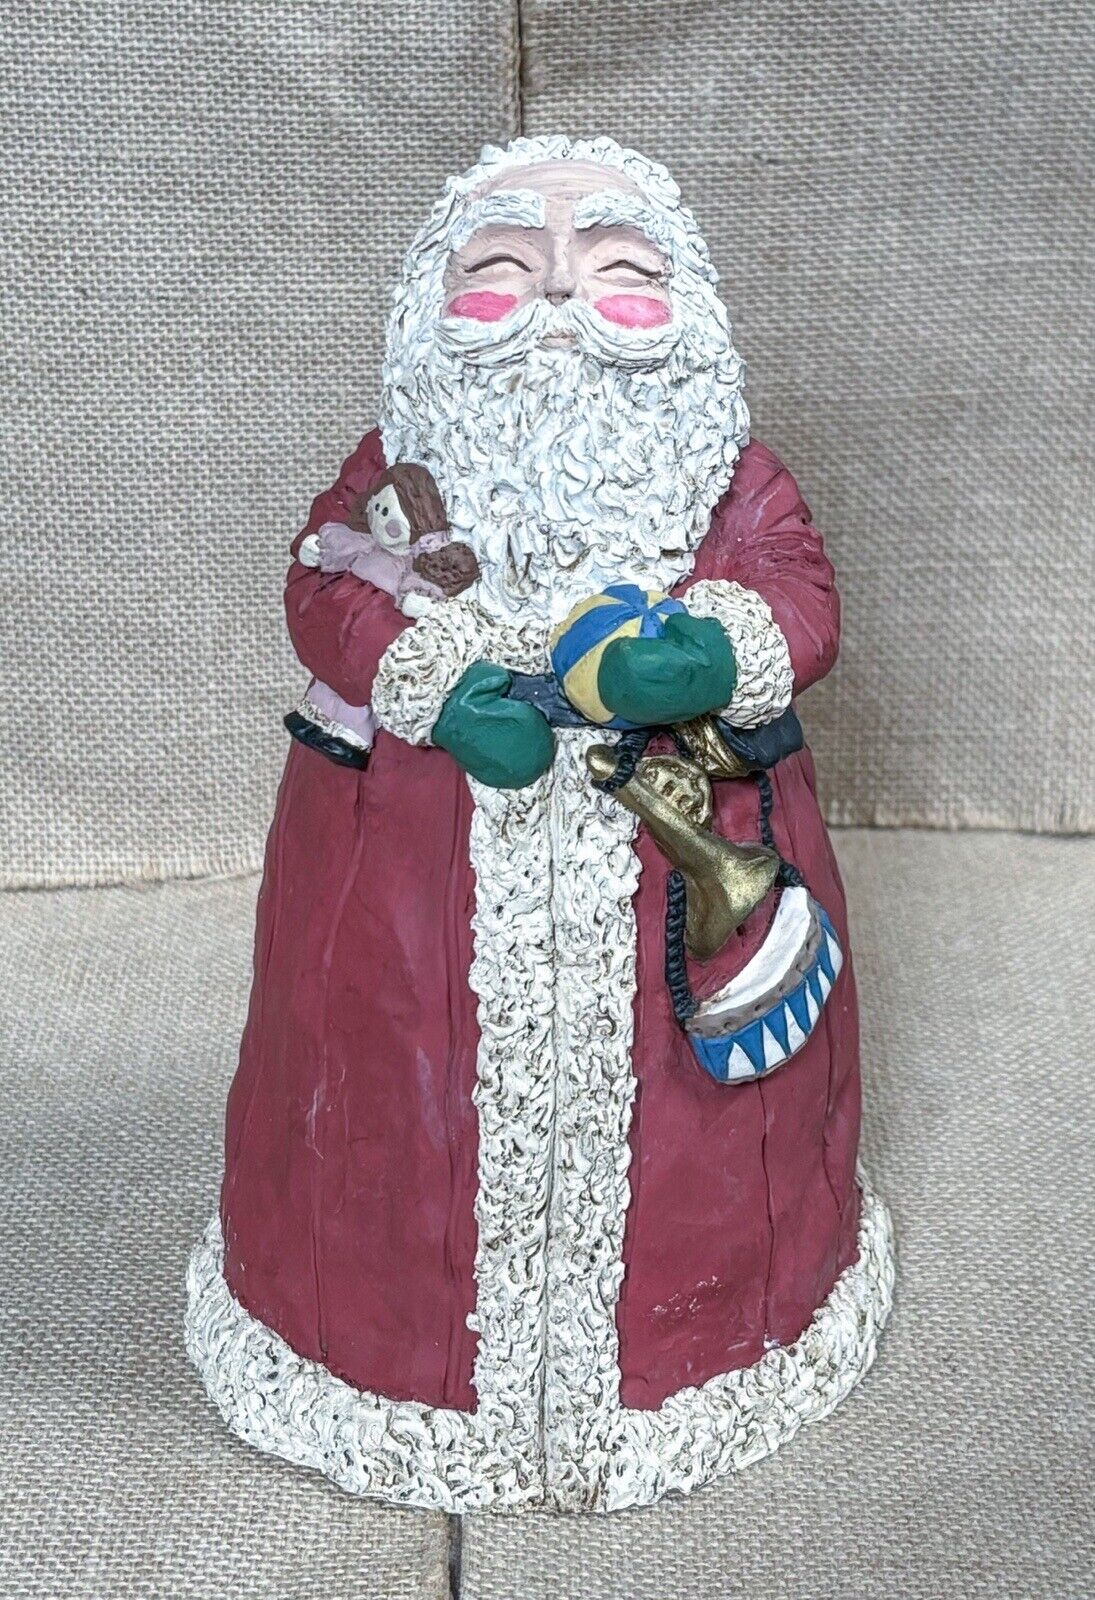 Rustic Vintage Constance Collection Resin Santa Claus Figure Jolly St Nick